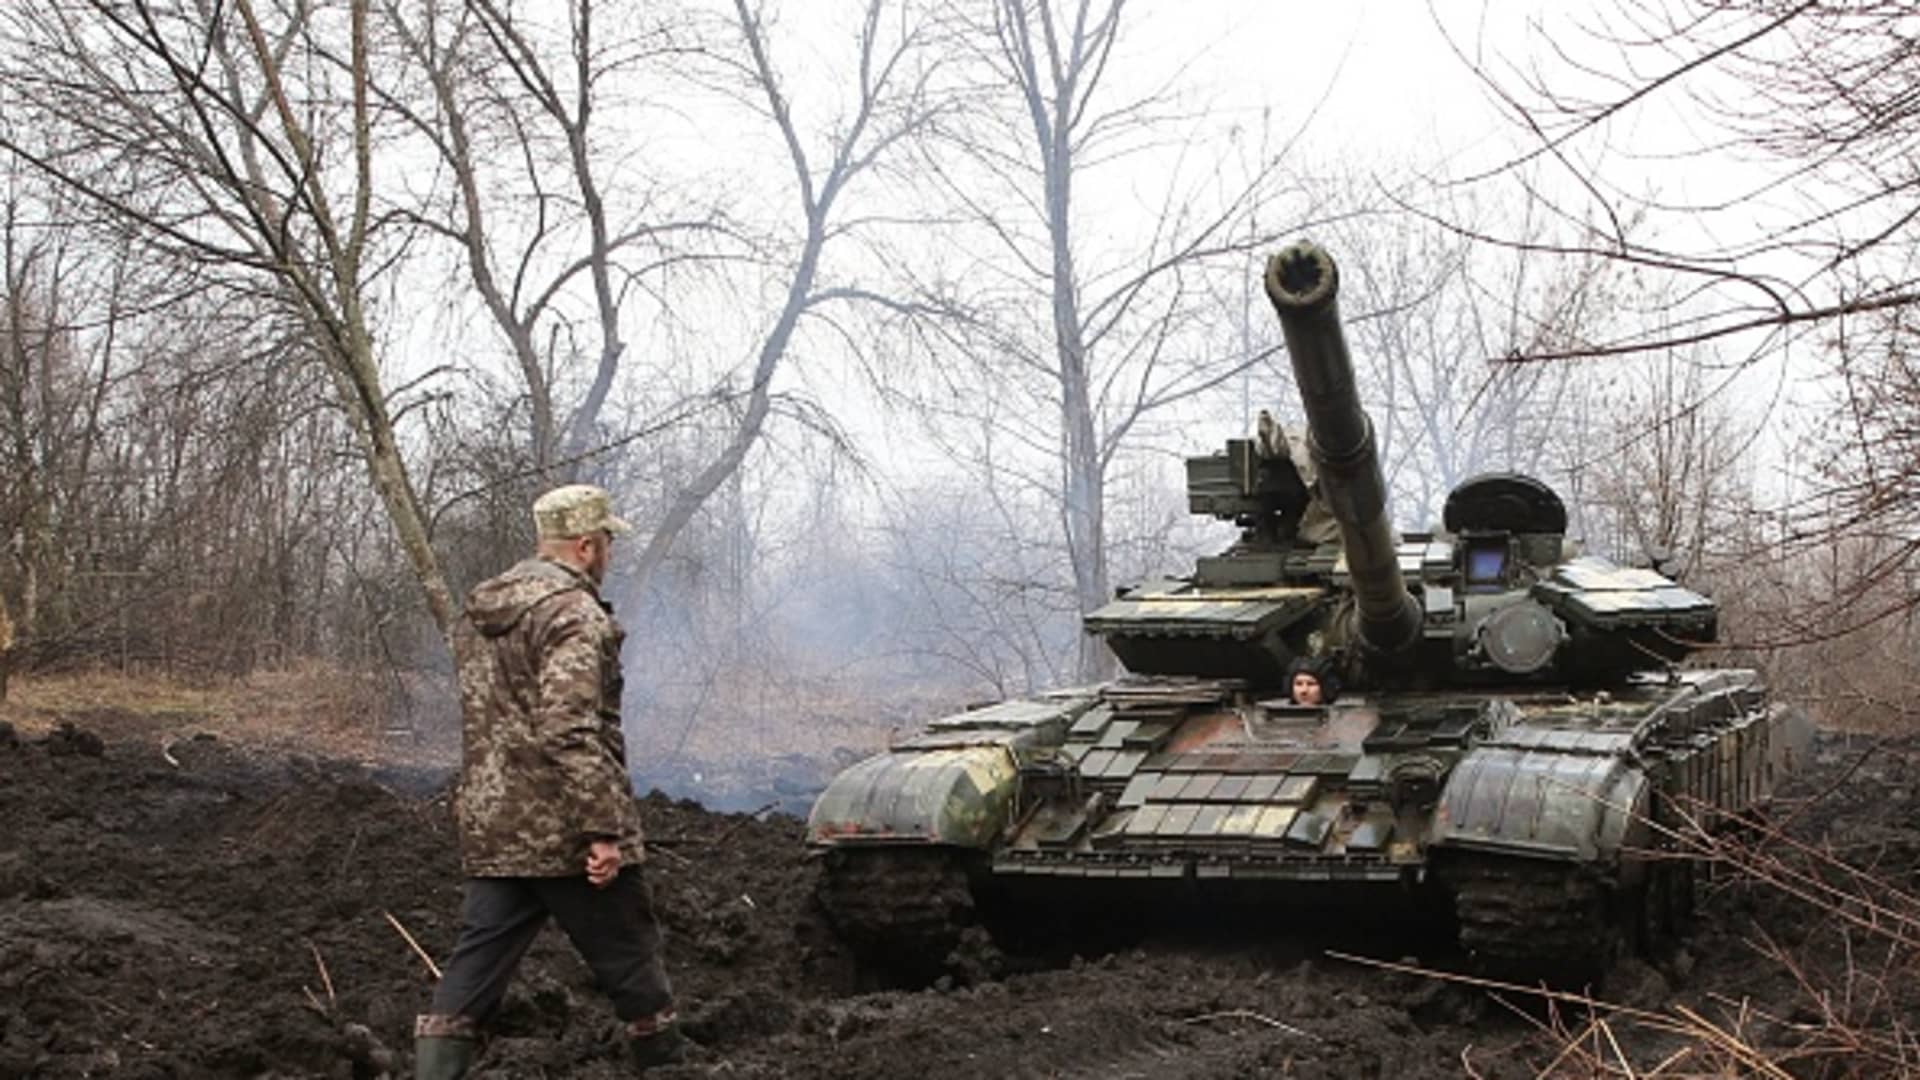 Ukrainian servicemen work on their tank close to the front line with Russian-backed separatists near Lysychansk, Lugansk region on April 7, 2021.